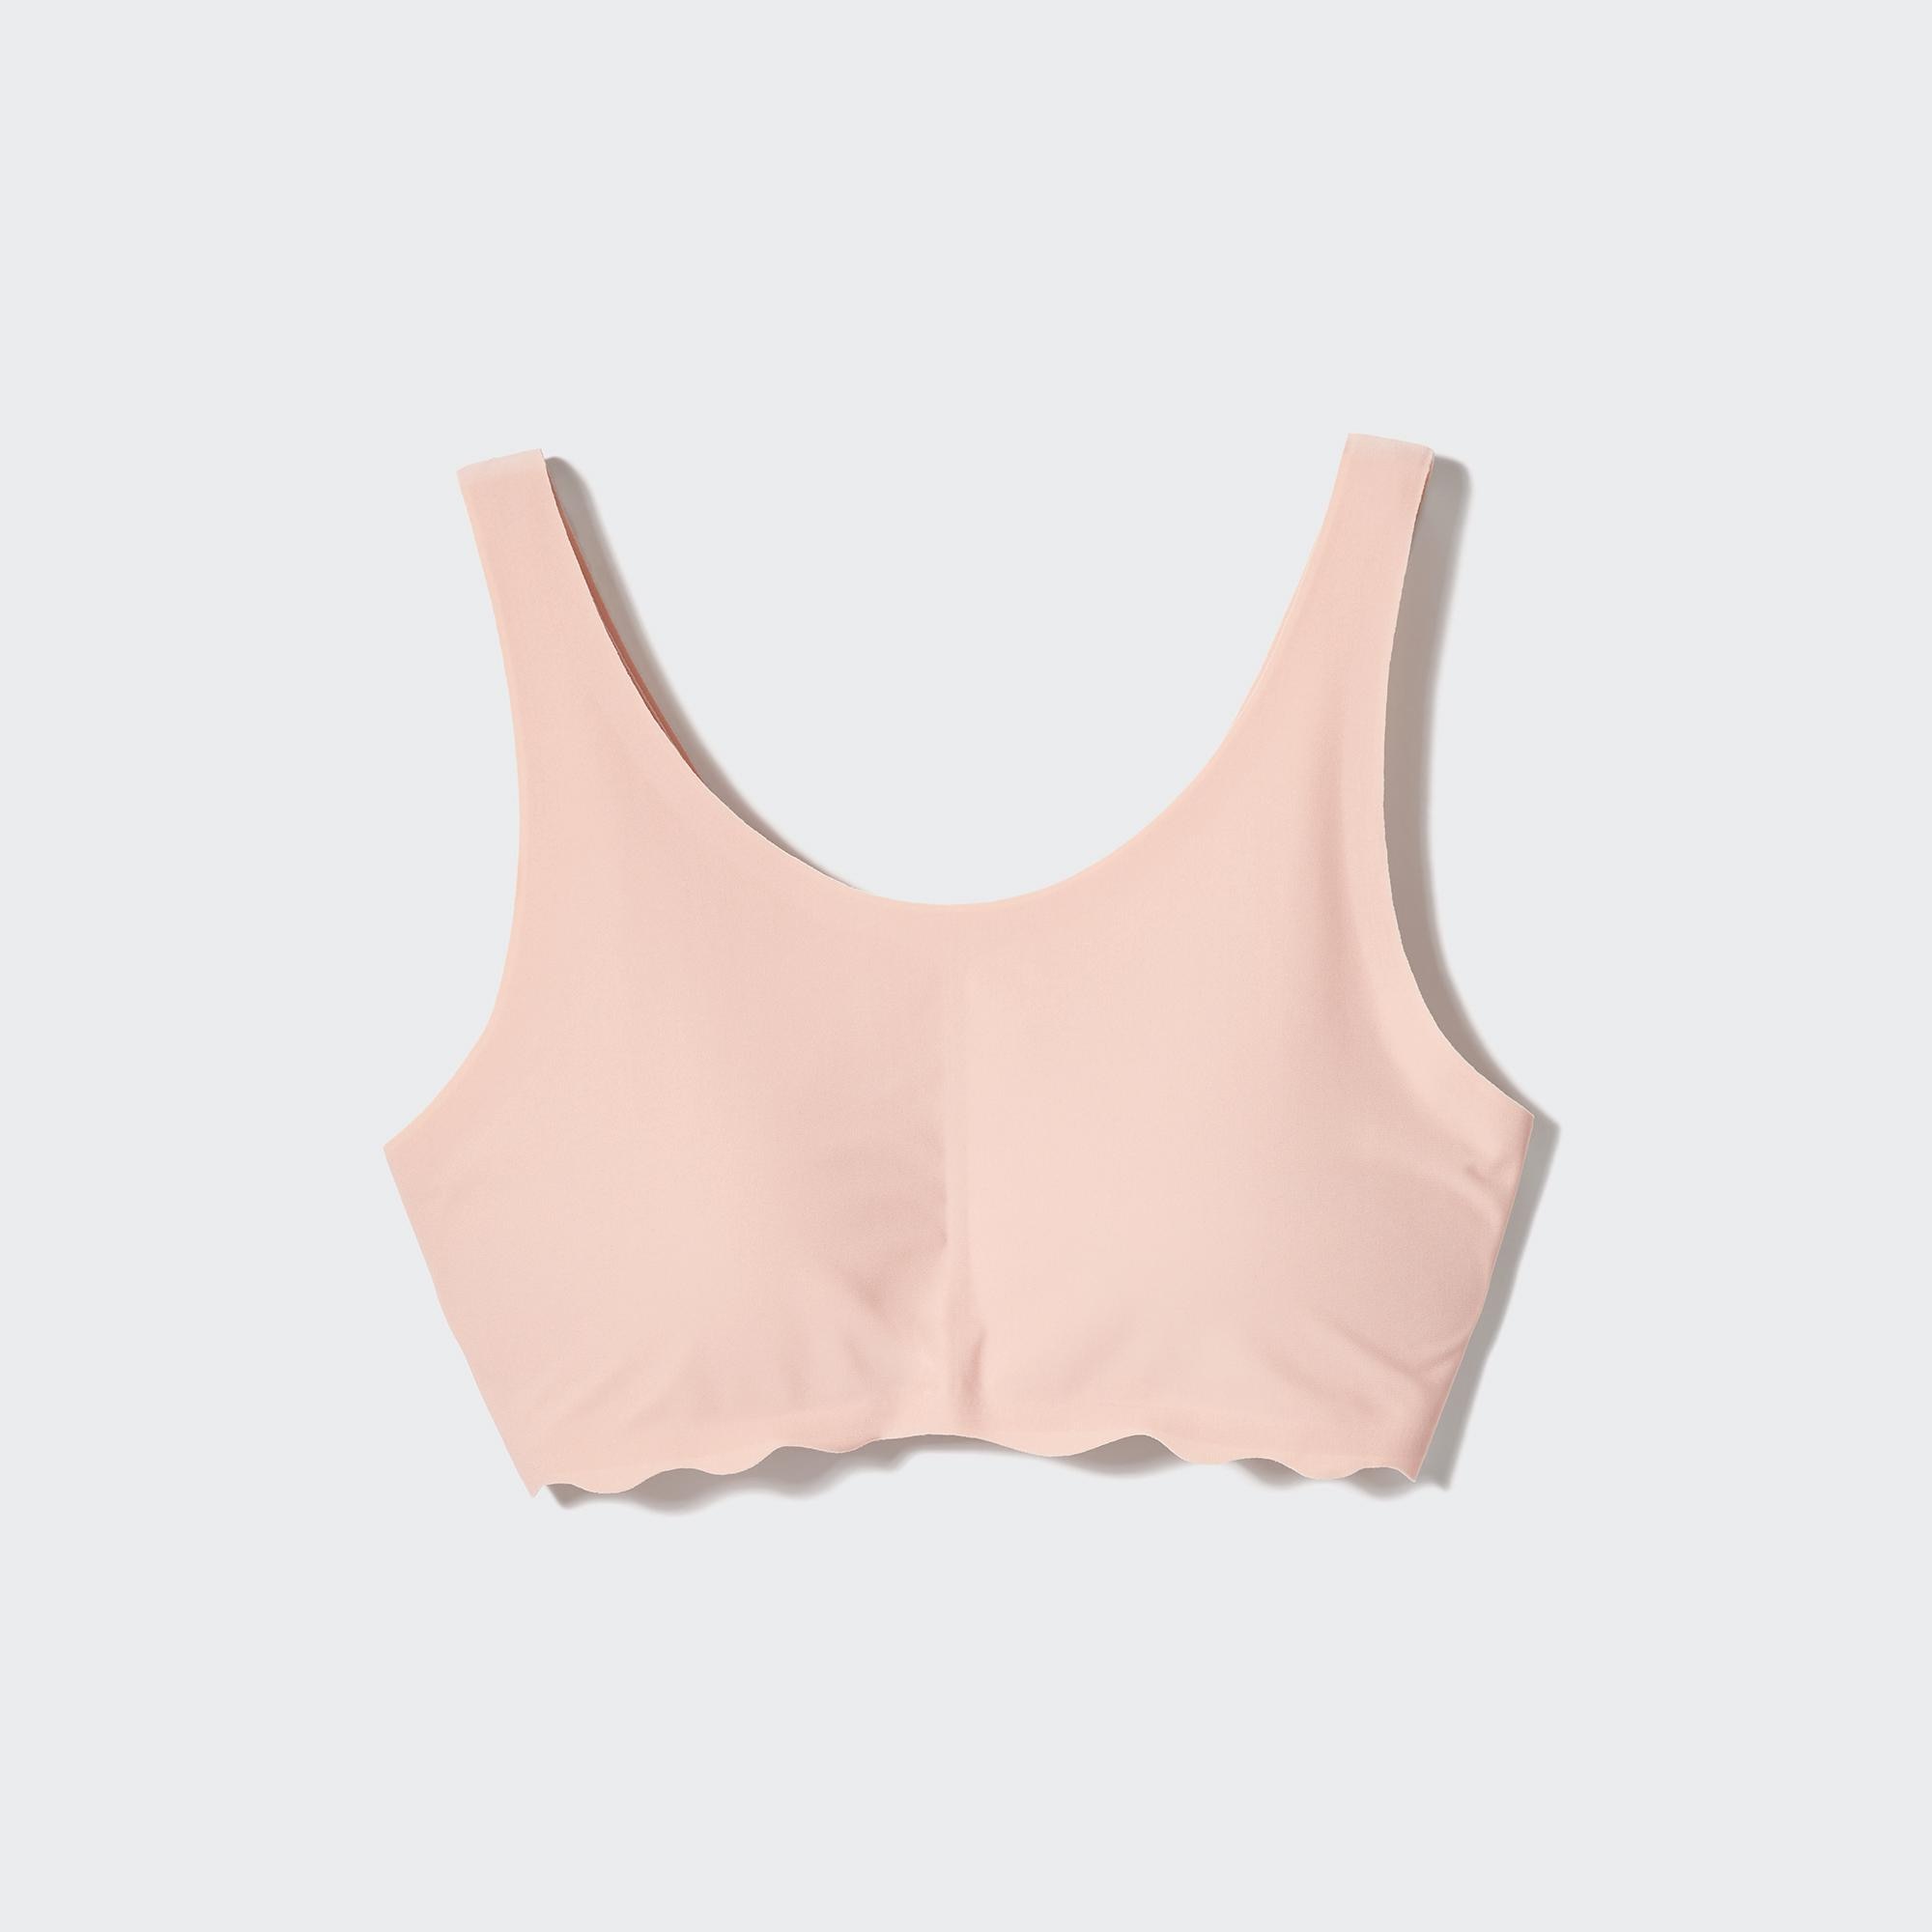 Stay cool and comfortable with our AIRism Bra Top! Made with